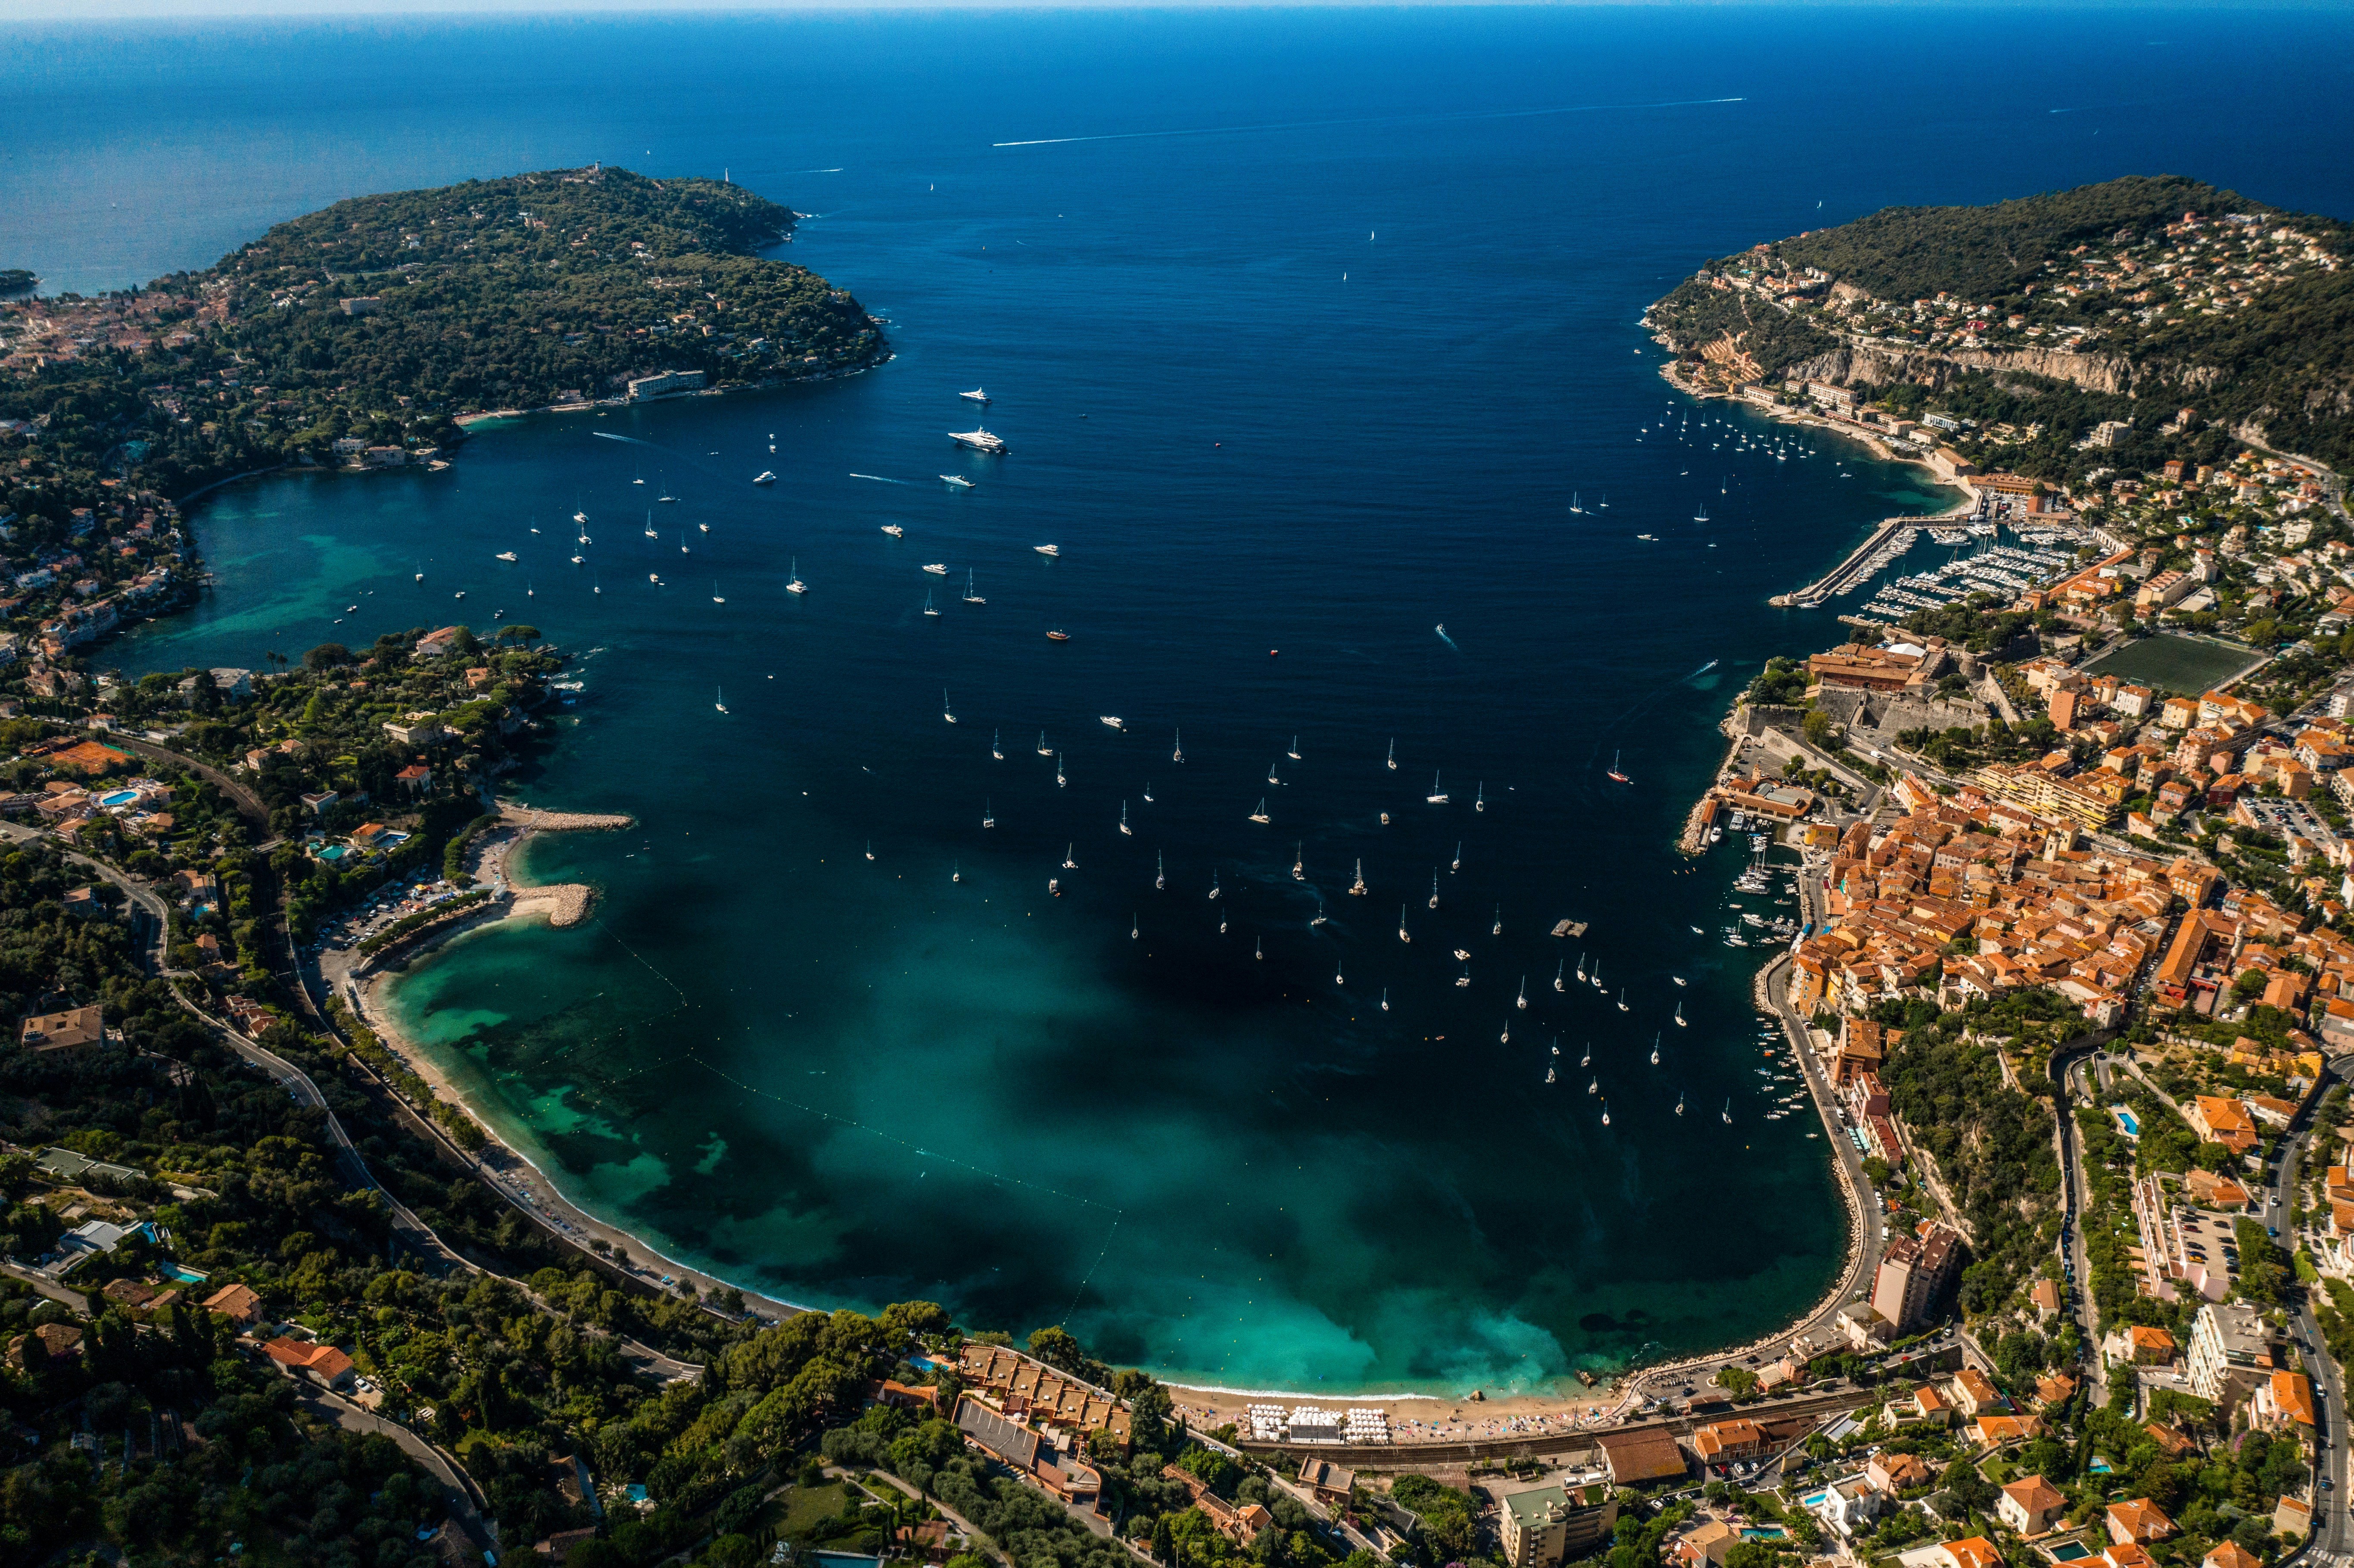 Buying a property in the Villefranche-sur-Mer and Saint-Jean Cap Ferrat area